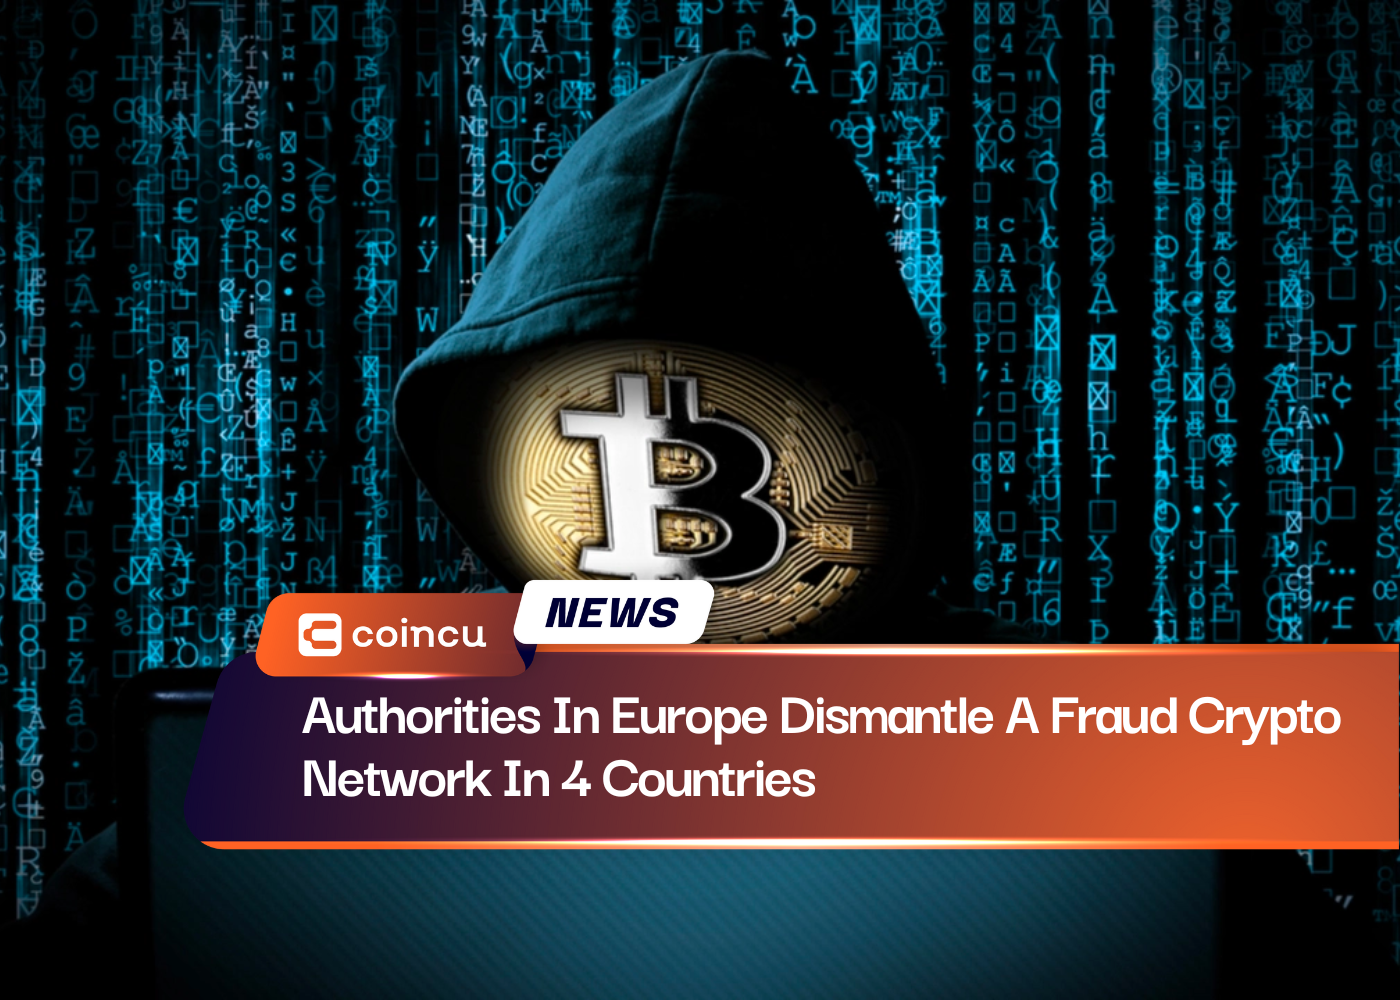 Authorities In Europe Dismantle A Fraud Crypto Network In 4 Countries